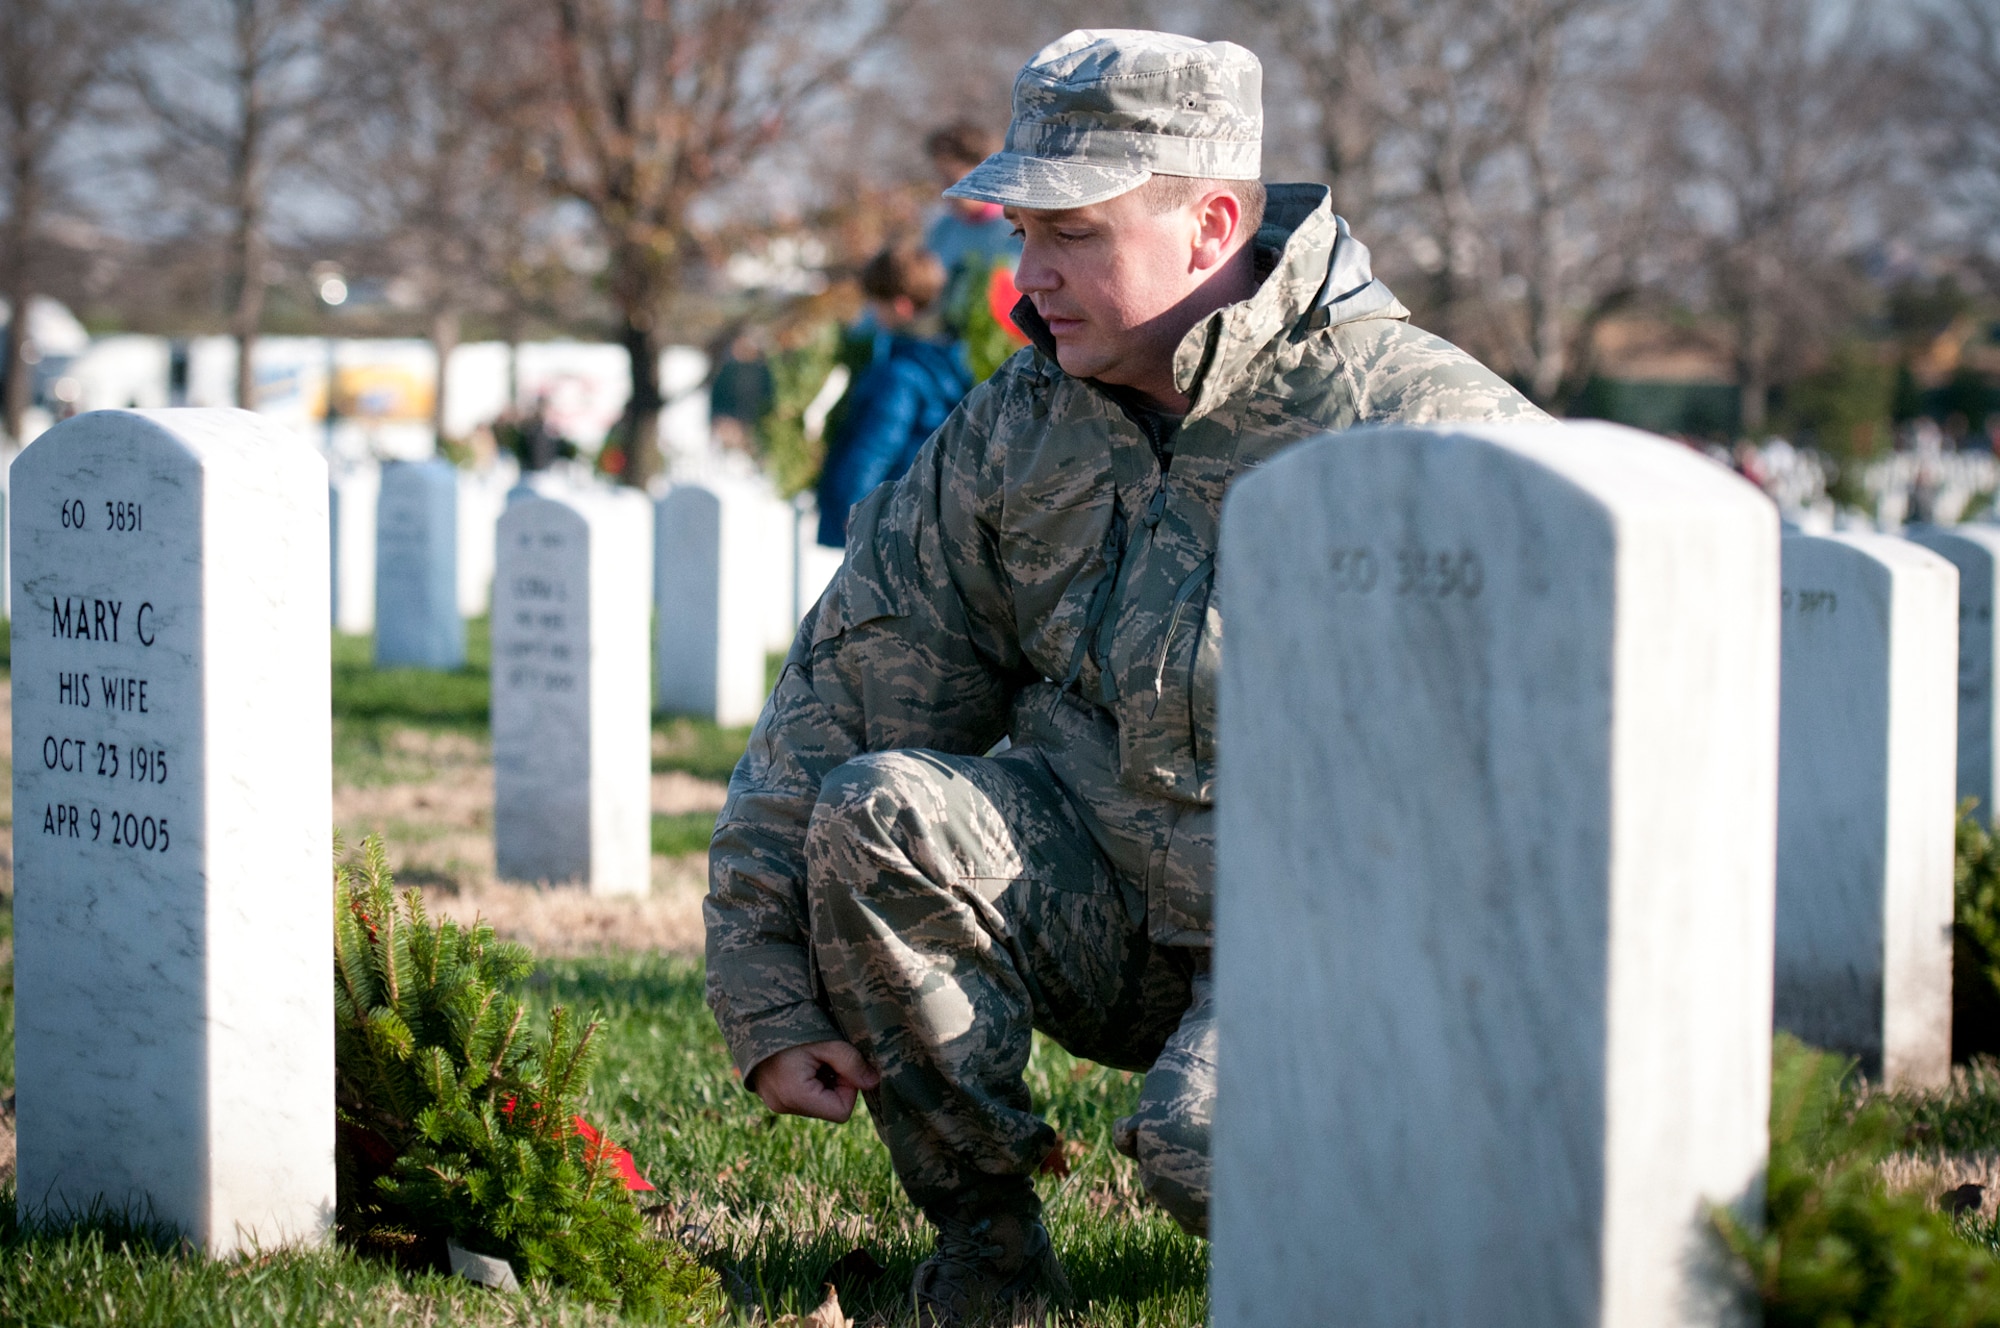 ARLINGTON, Va. -- 459th Air Refueling Airmen and their families joined over 10,000 servicemembers and civilian volunteers for the annual wreath laying at Arlington National Cemetery Dec. 10. 459 ARW Airmen took part in almost every aspect of the event, including transporting thousands of wreaths in trucks, greeting volunteers at the front gates and providing security. An estimated 85,000 wreaths were placed on the gravestones of fallen servicemembers and their loved ones. (U.S. Air Force photo/Tech. Sgt. Steve Lewis)